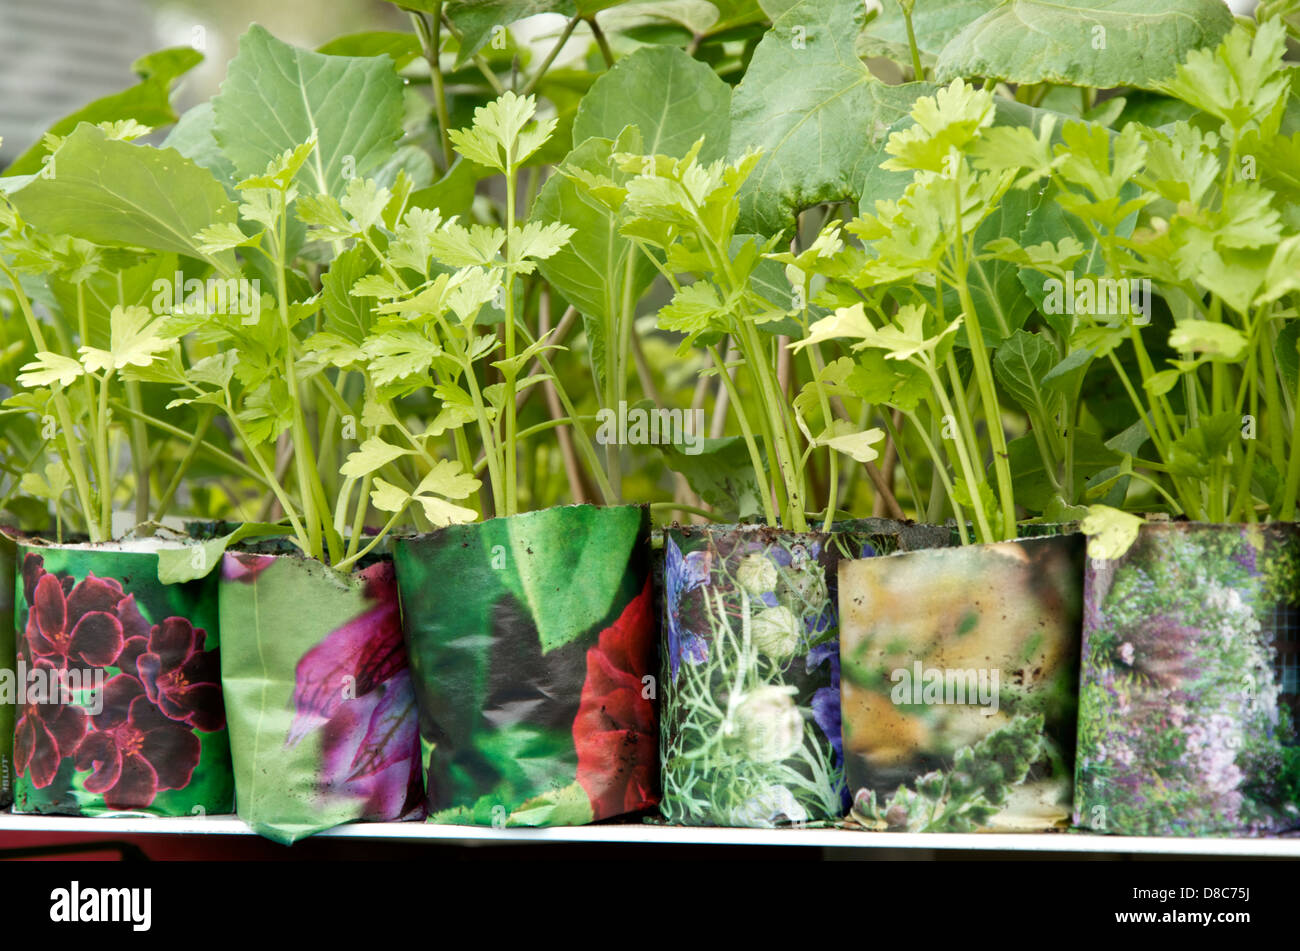 Herb and vegetables seedlings in newspaper pots on Burgon & Ball stand at RHS Chelsea Flower Show 2013, London, UK Stock Photo